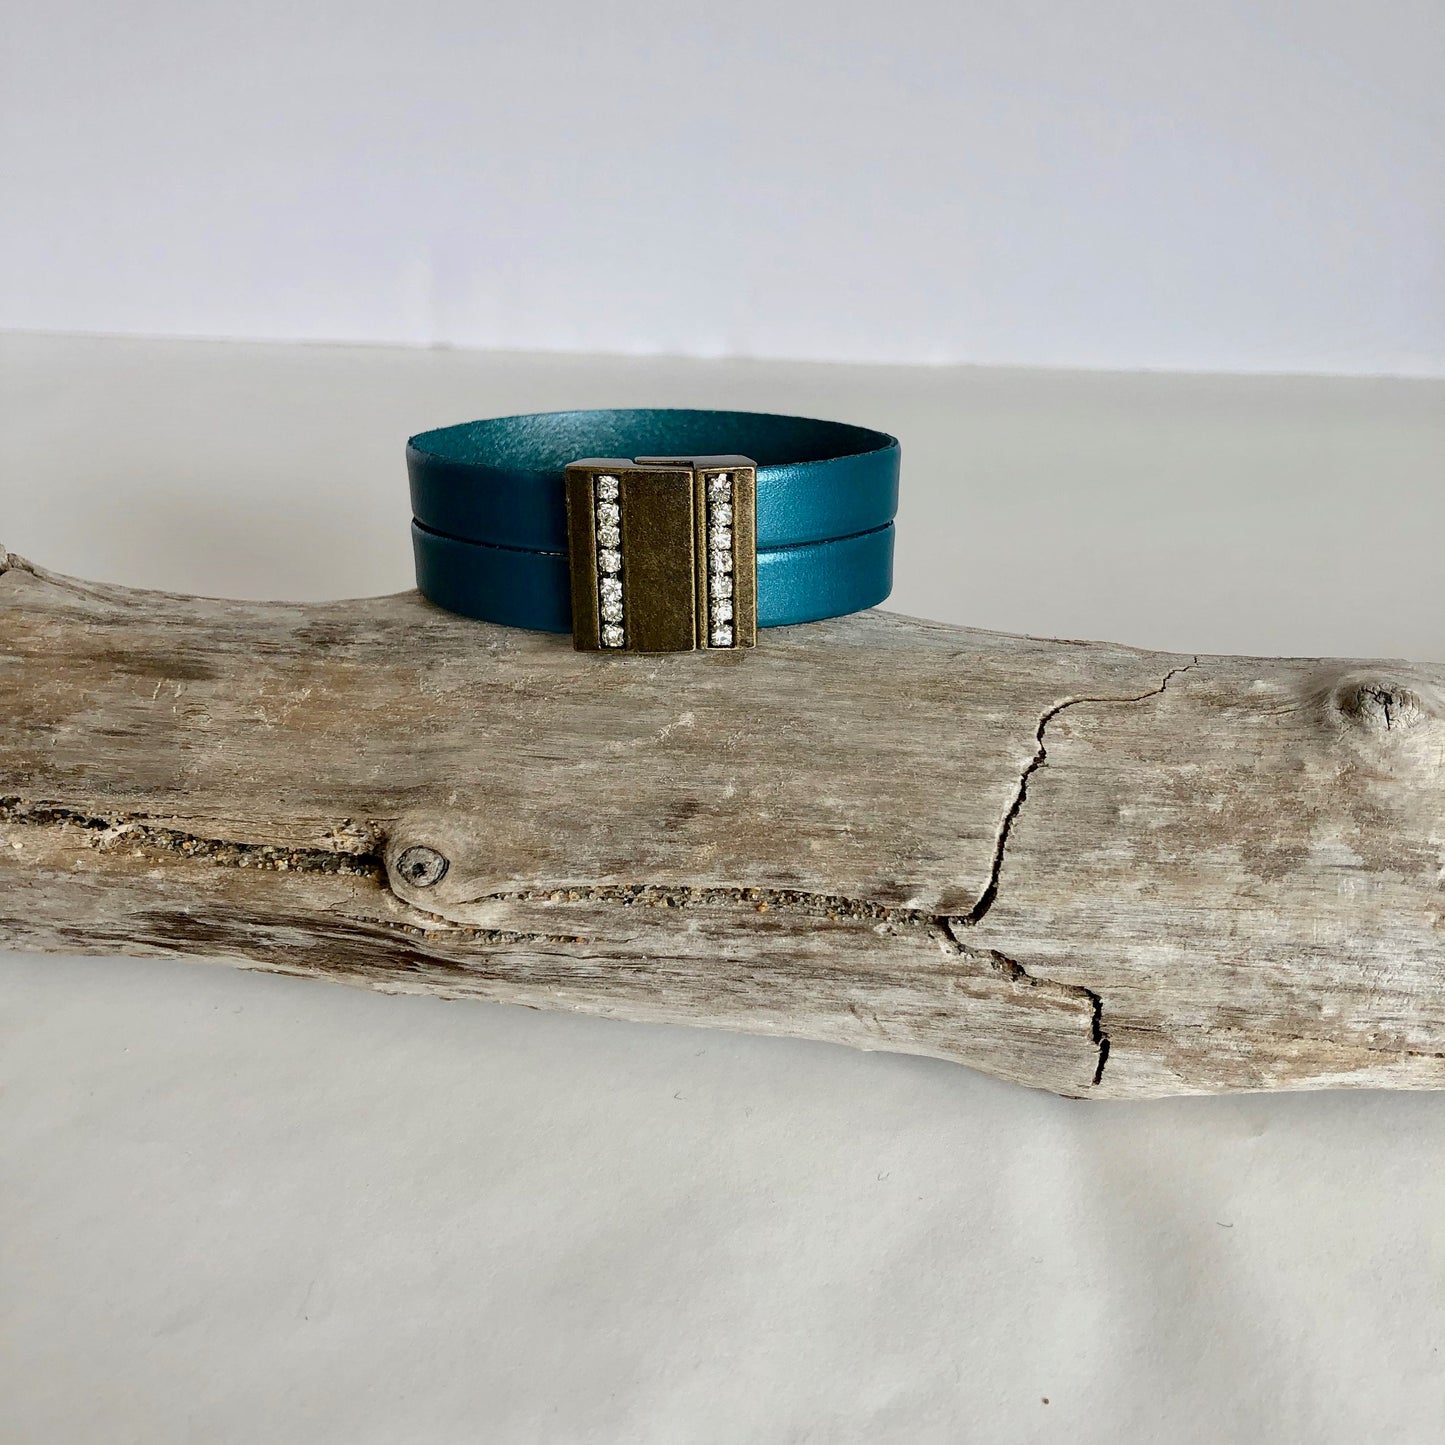 Leather bracelet, made with beautiful teal Italian leather, and finished with a quality bronze and crystal magnetic clasp. Double wrapped.